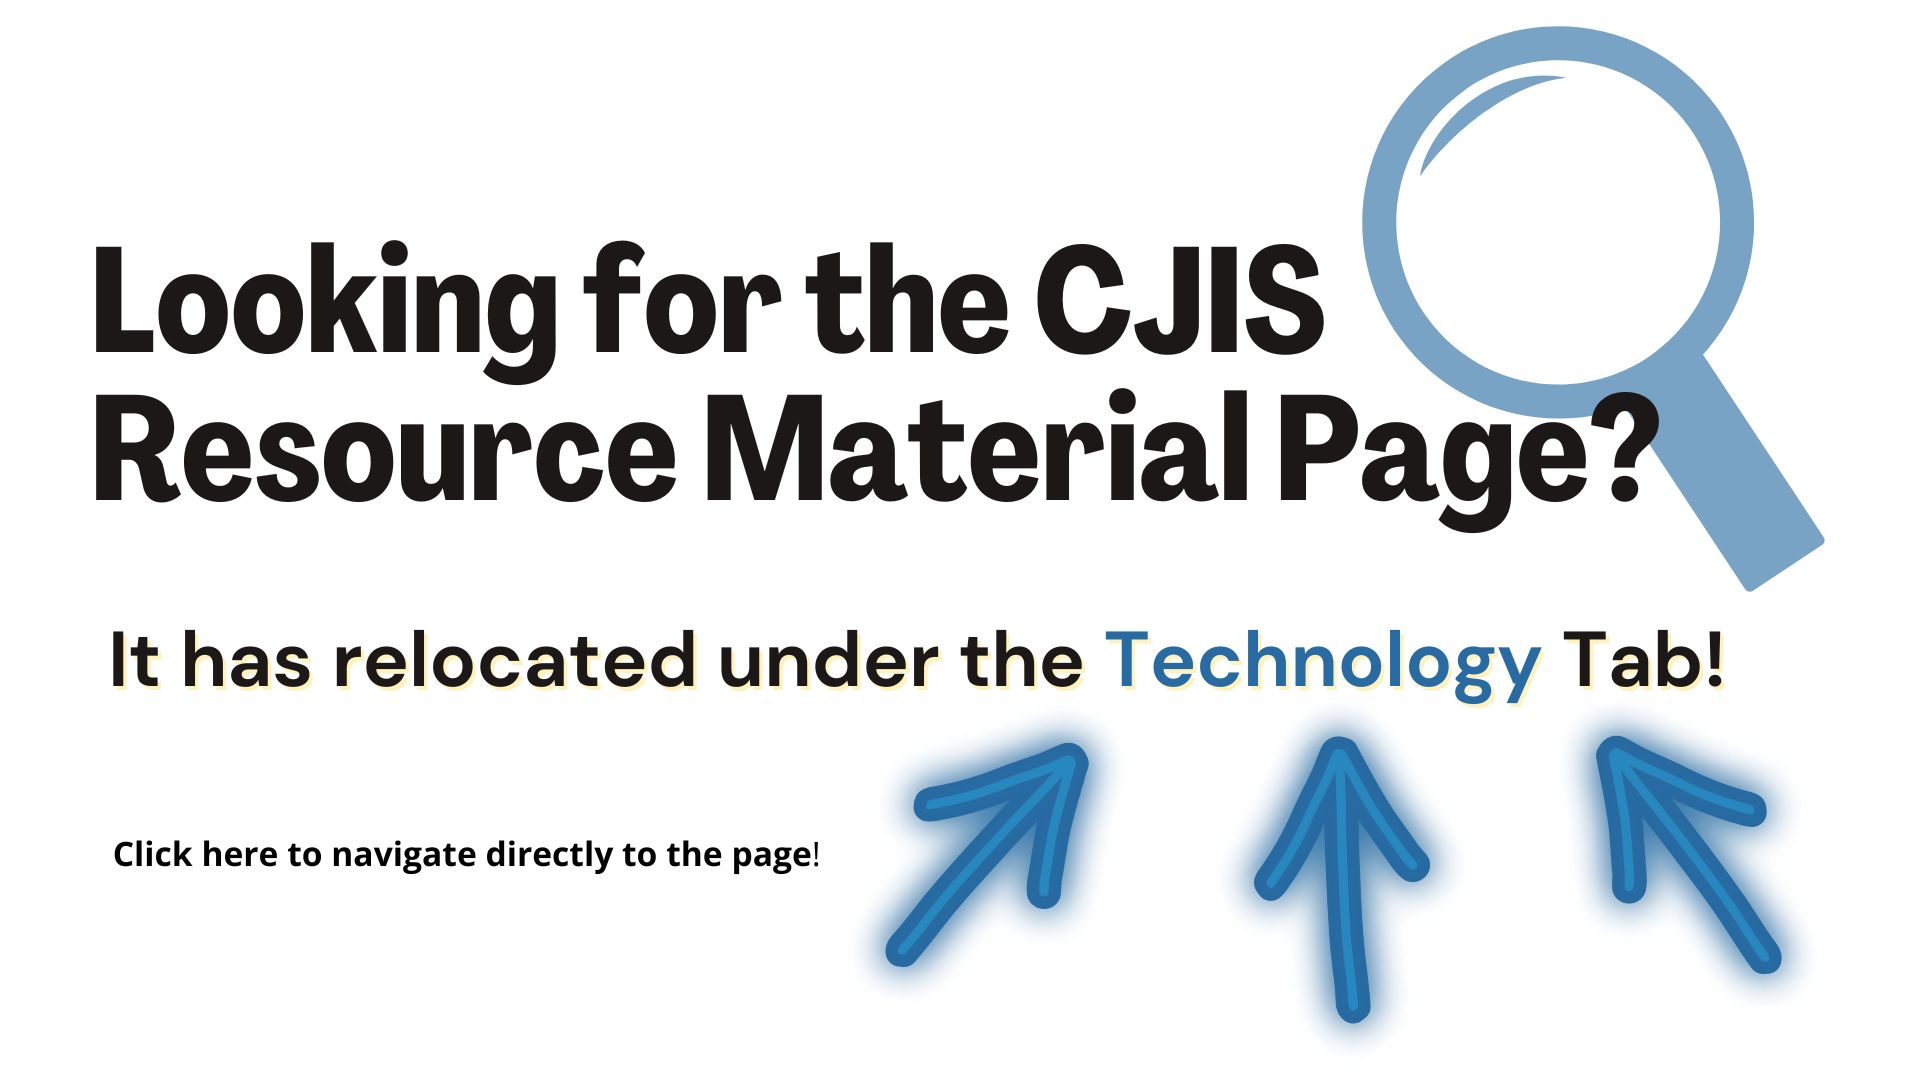 CJIS Resource Material Page Relocated